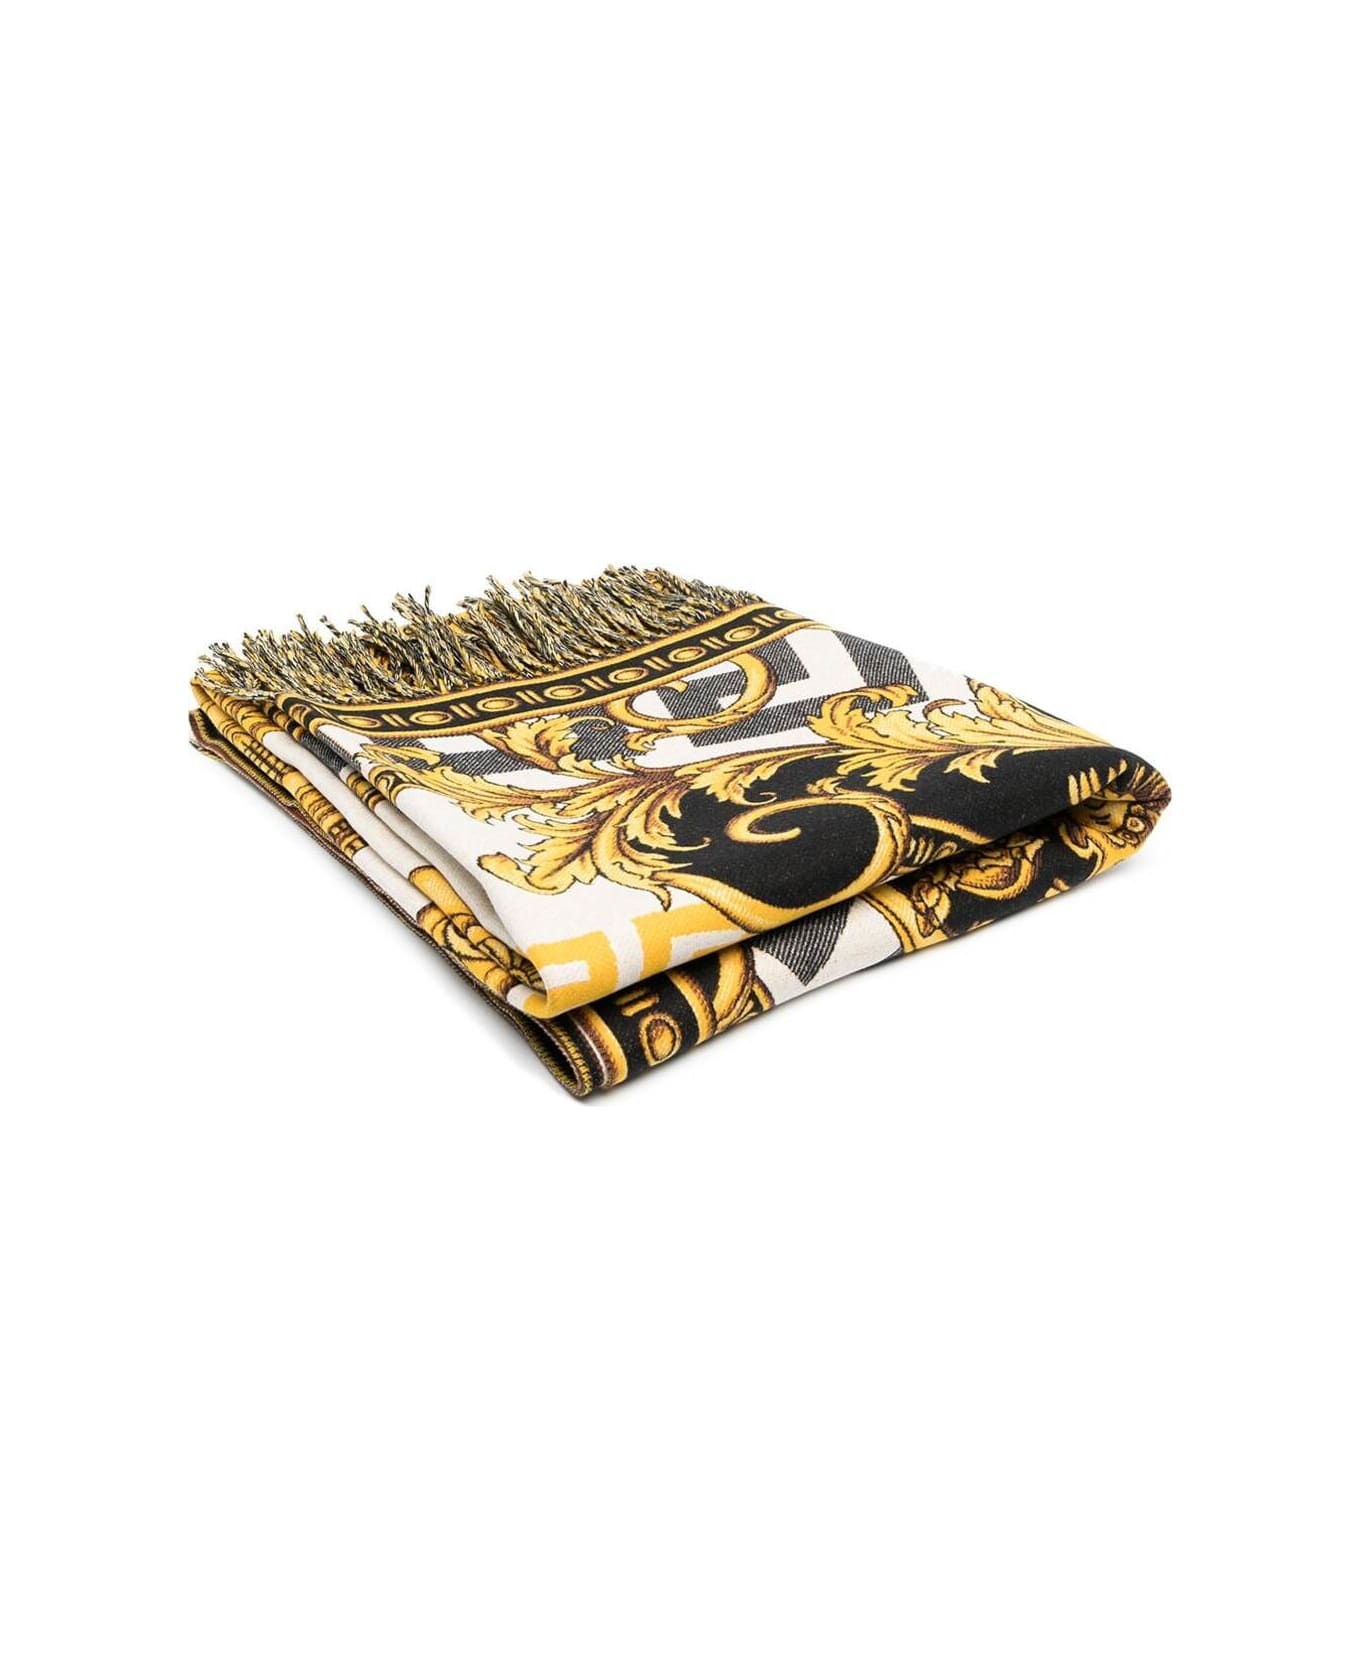 Versace White / Gold / Black Wool Blanket With All Over Baroque Print - Black